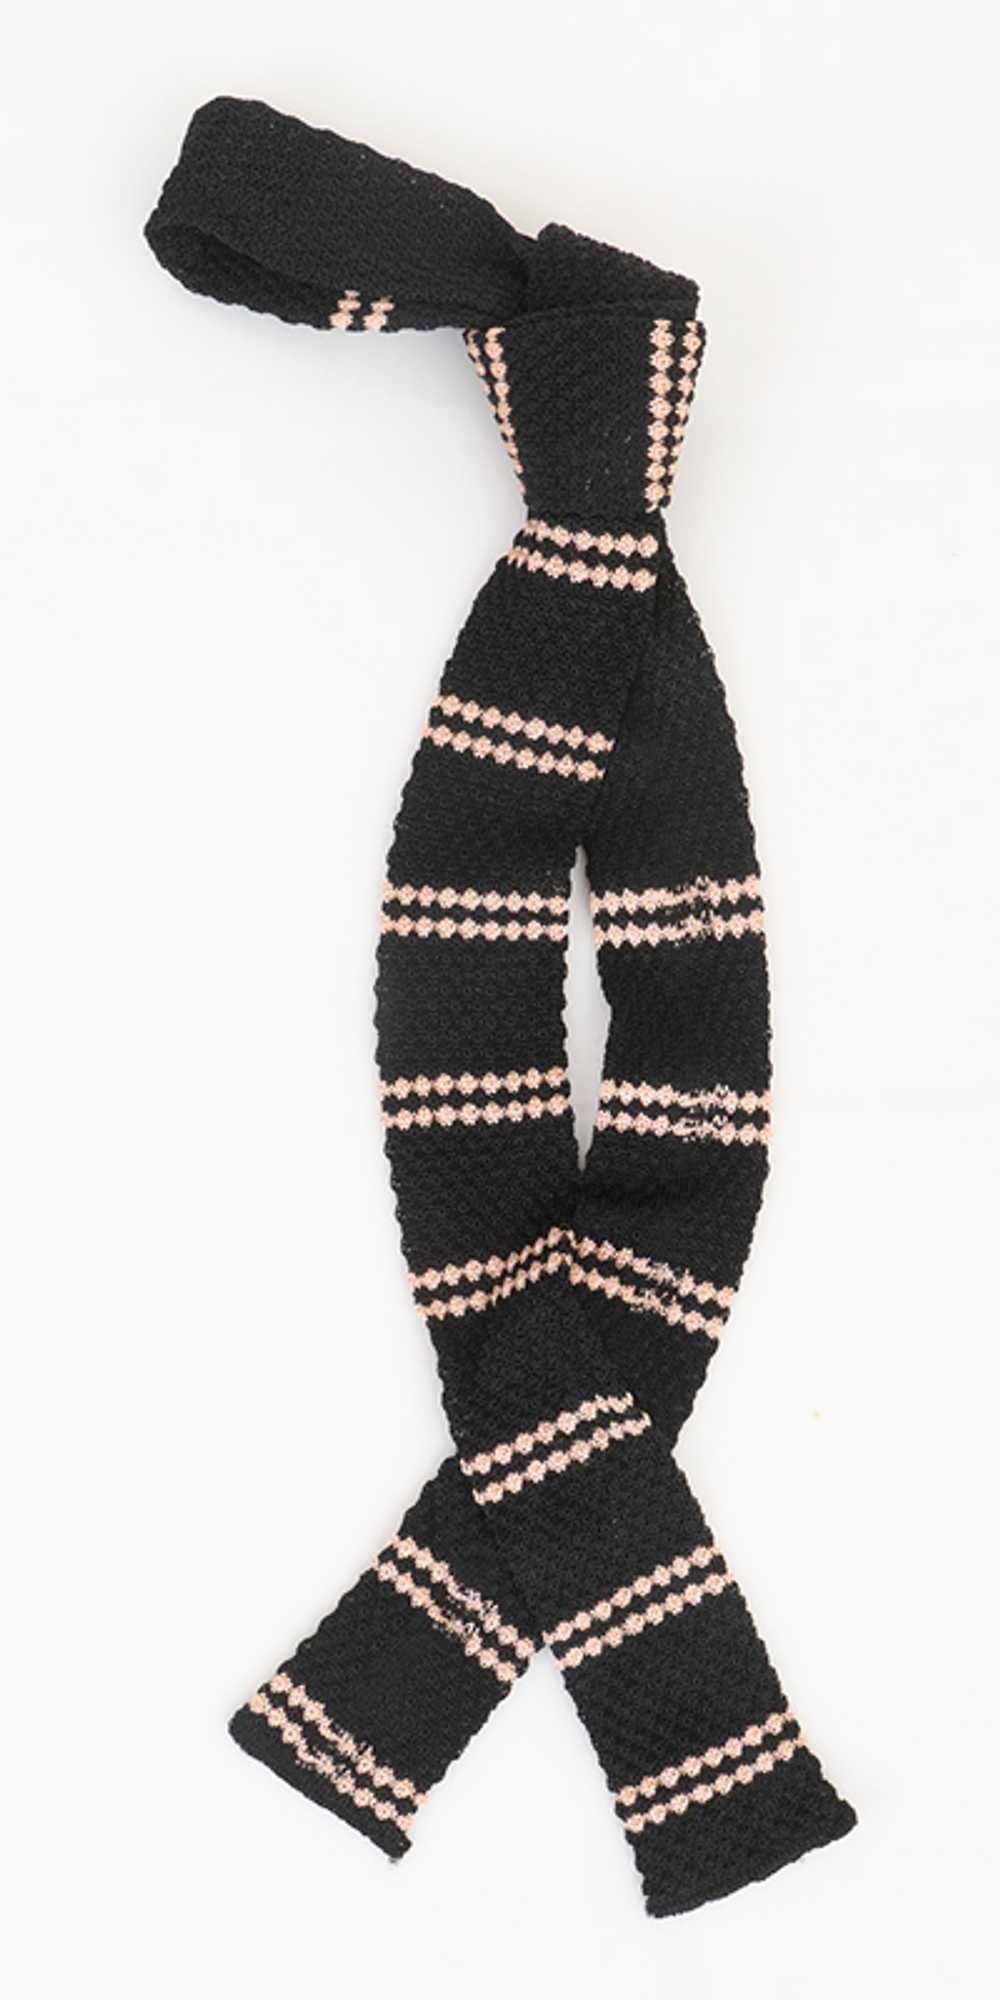 1950s Knit Tie in Black and Pink - image 1